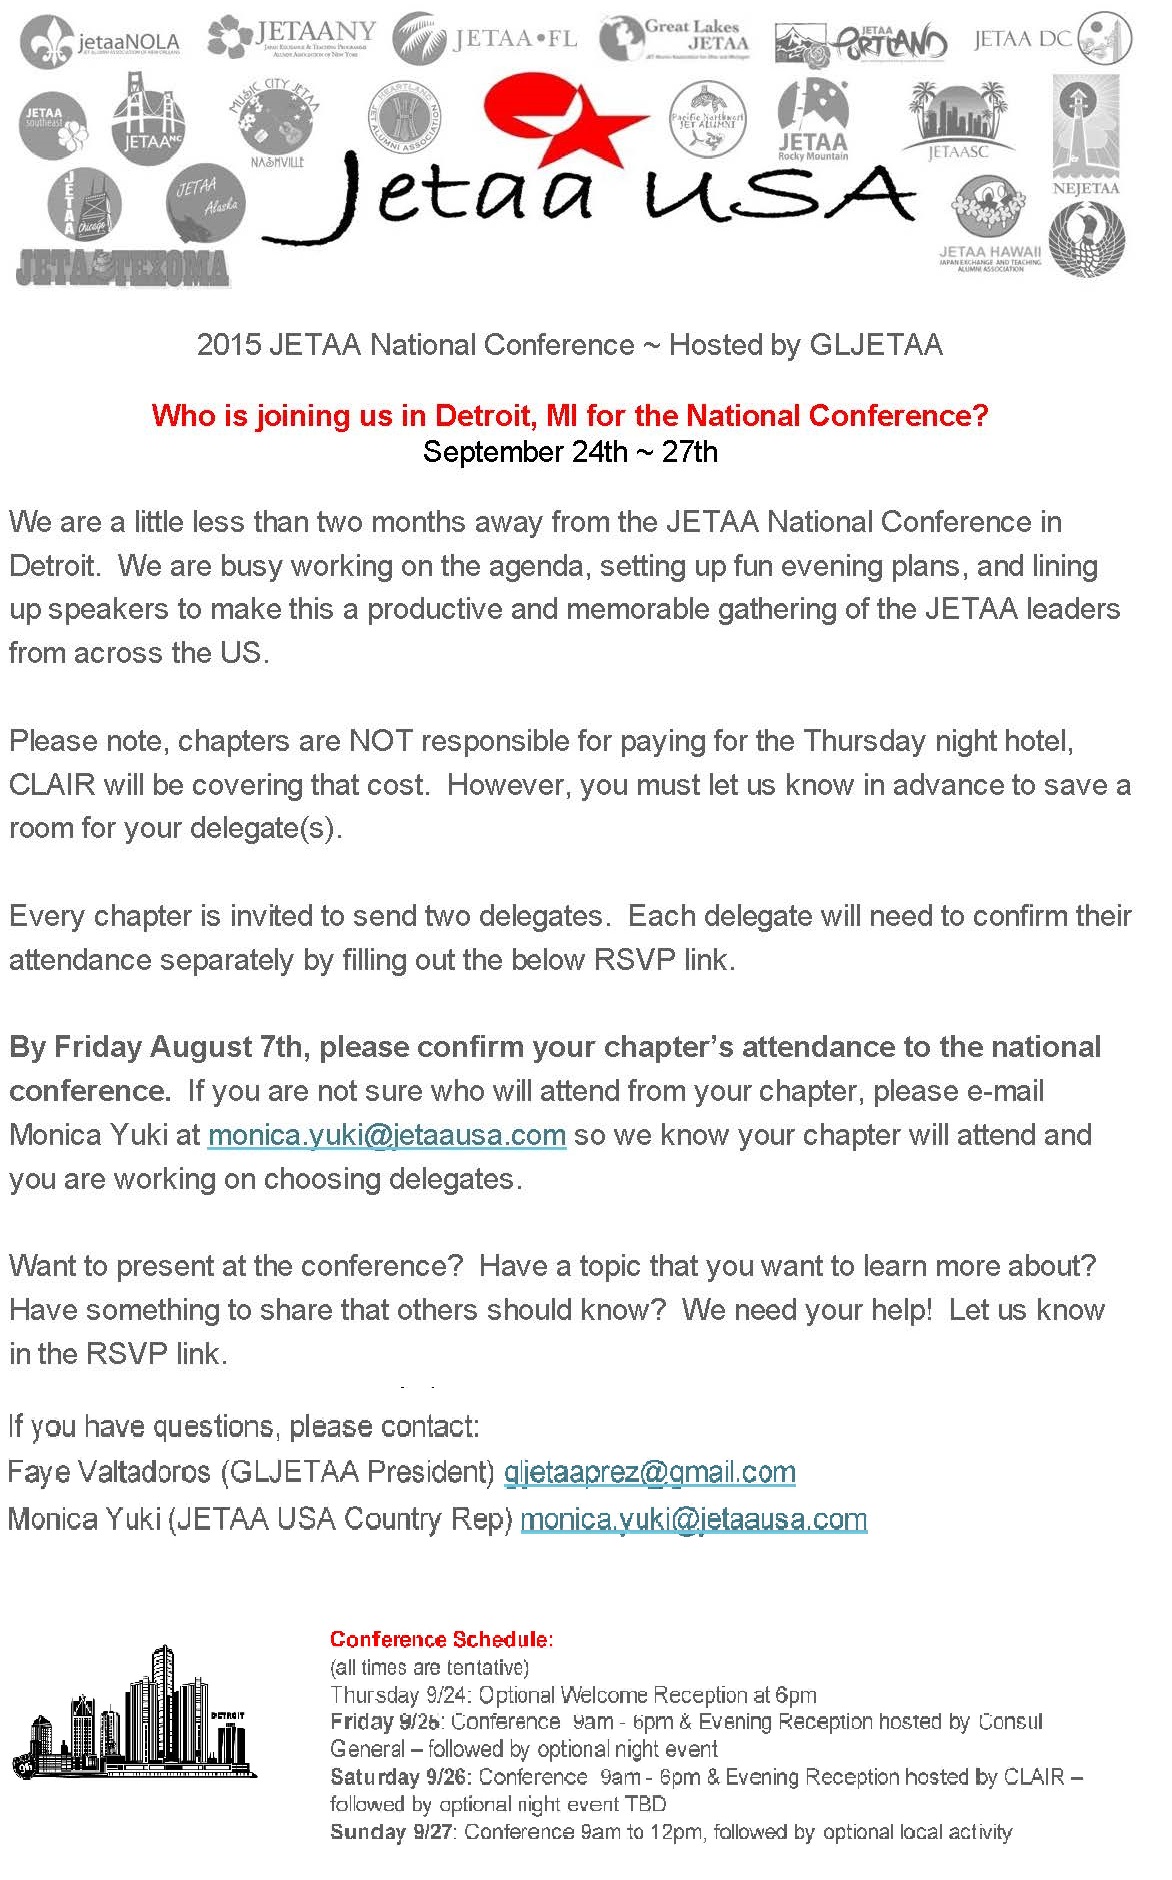 Sign up for the JETAA National Conference in Detroit